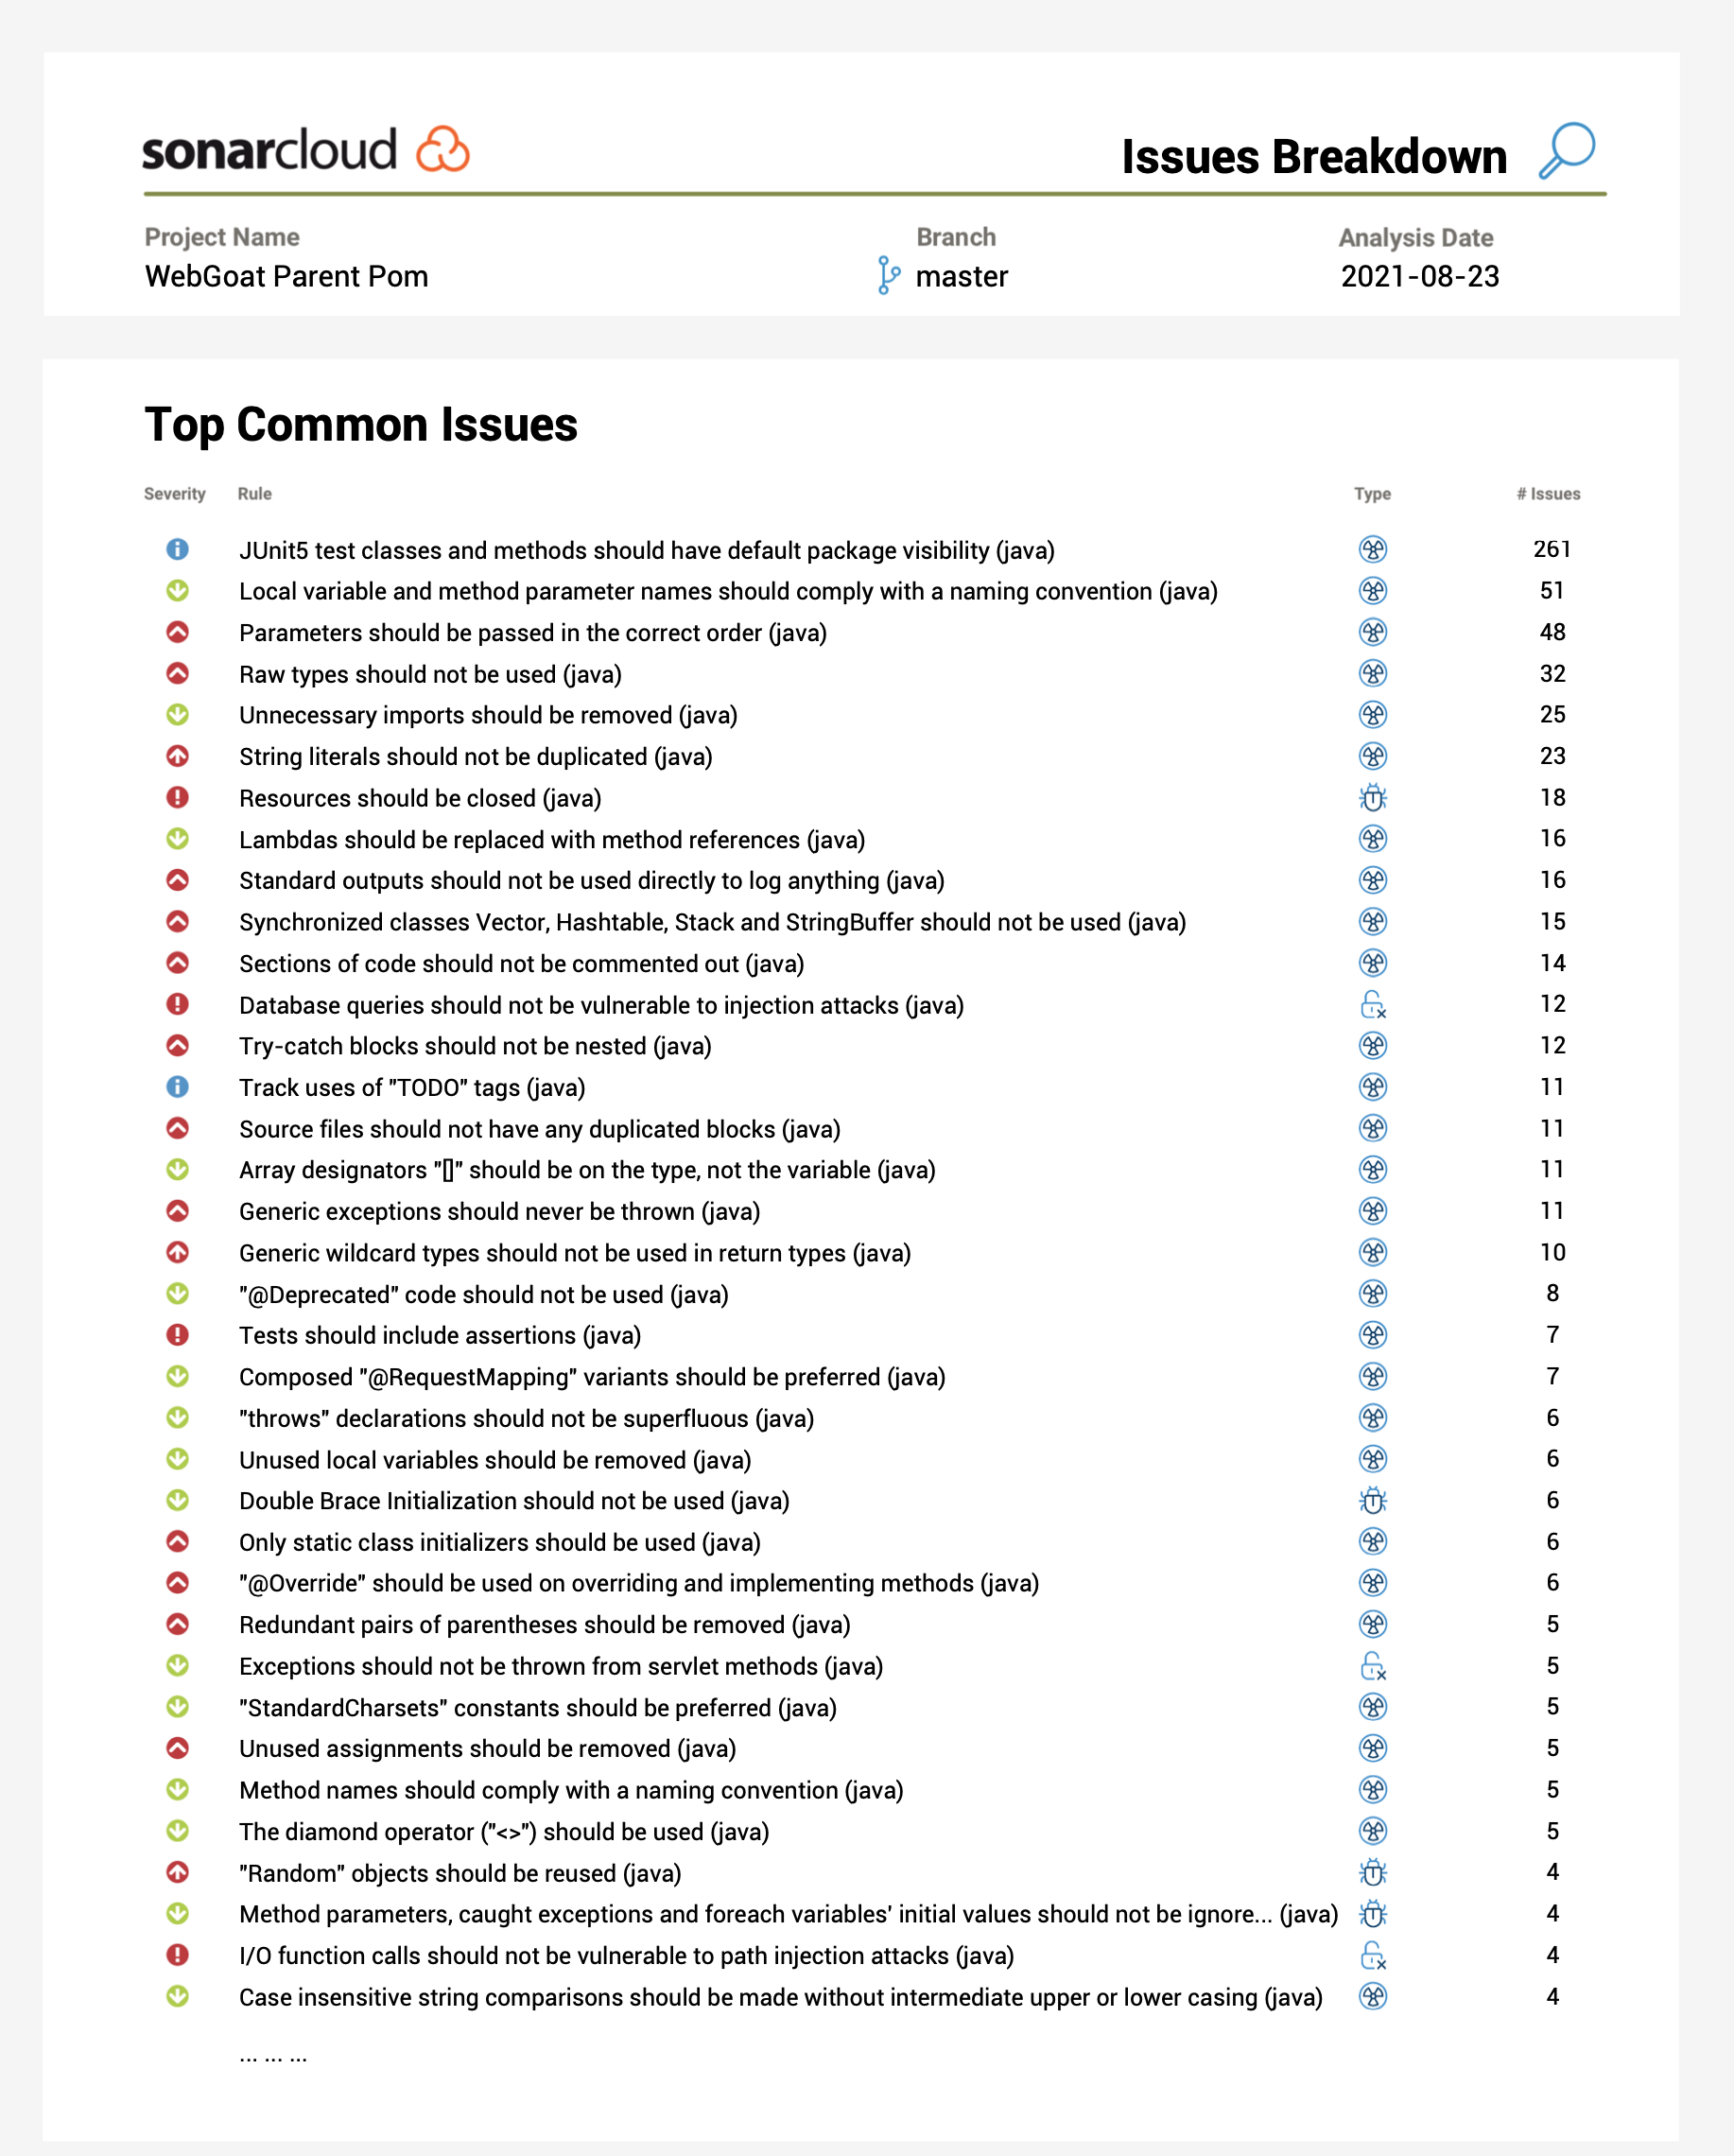 Download the report from SonarCloud - Top Common Issues